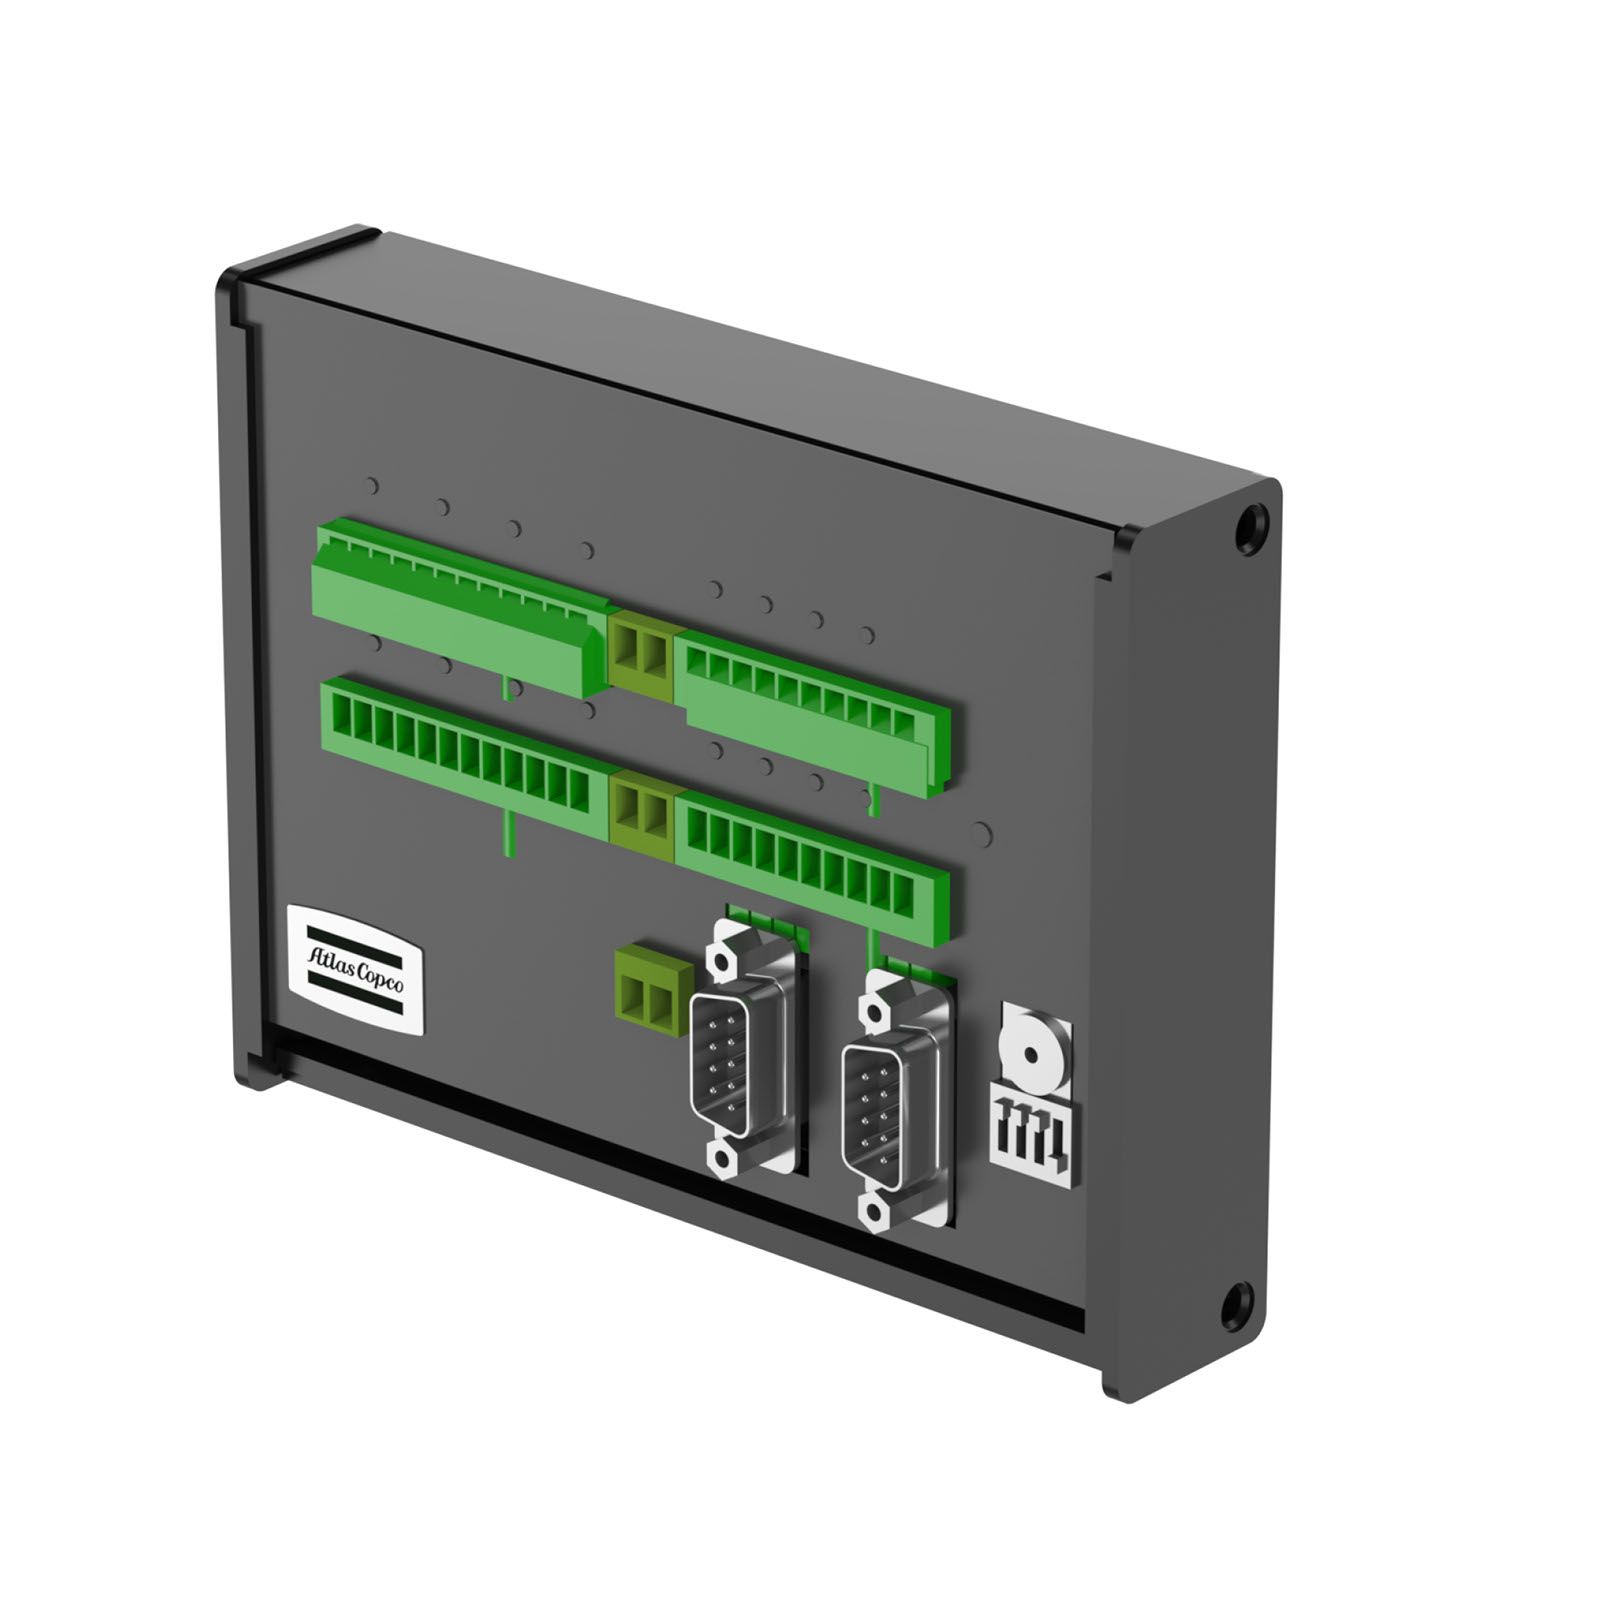 OPEN I/O EXPANDER productfoto